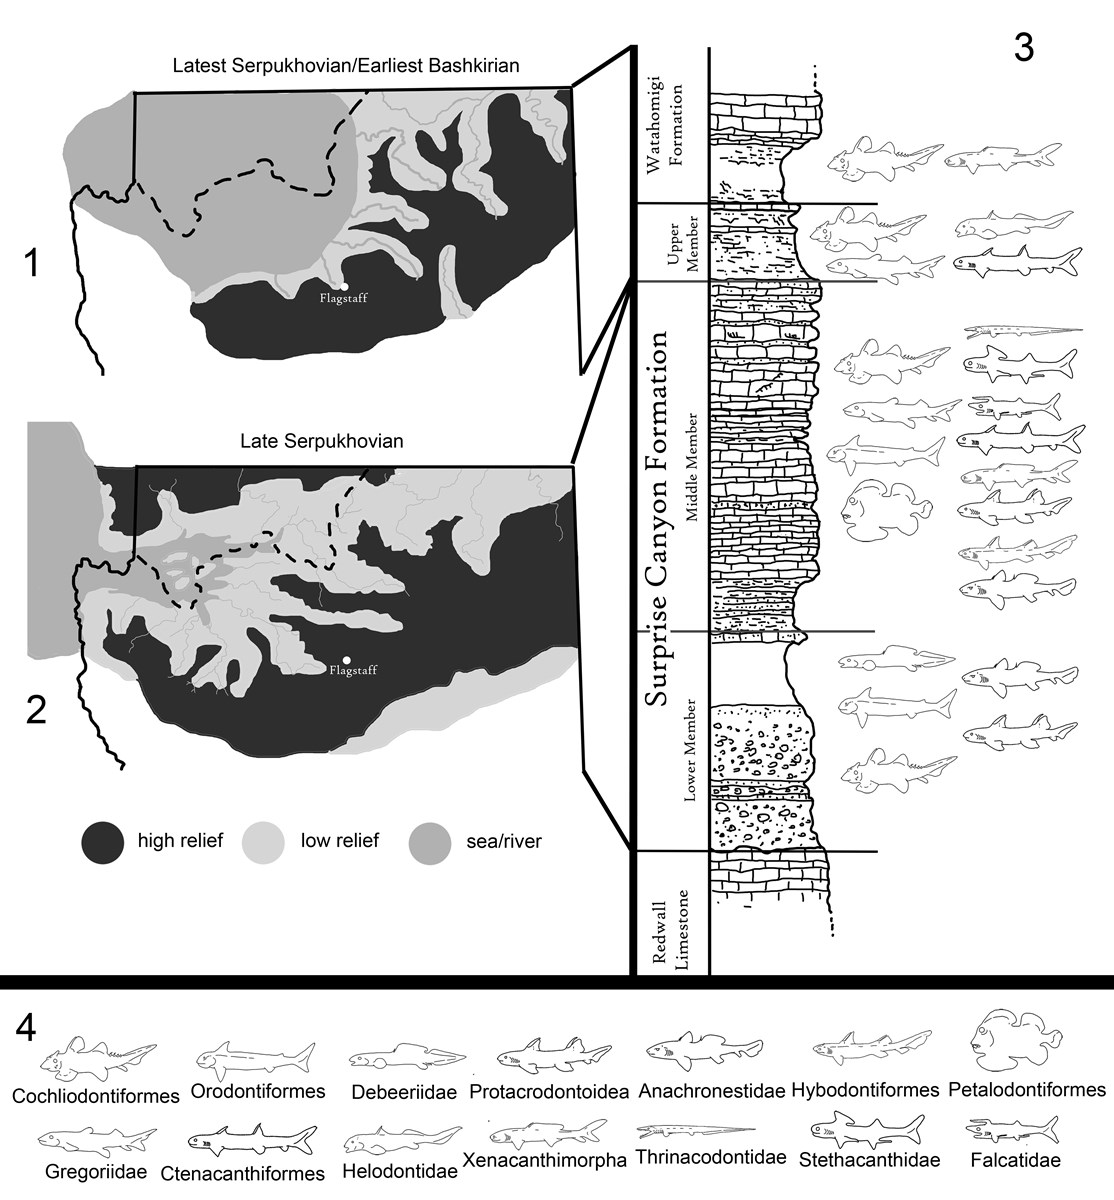 Paleogeography, generalized stratigraphy, and major taxonomic groups of chondrichthyans from the Surprise Canyon and Watahomigi Formations at the Grand Canyon